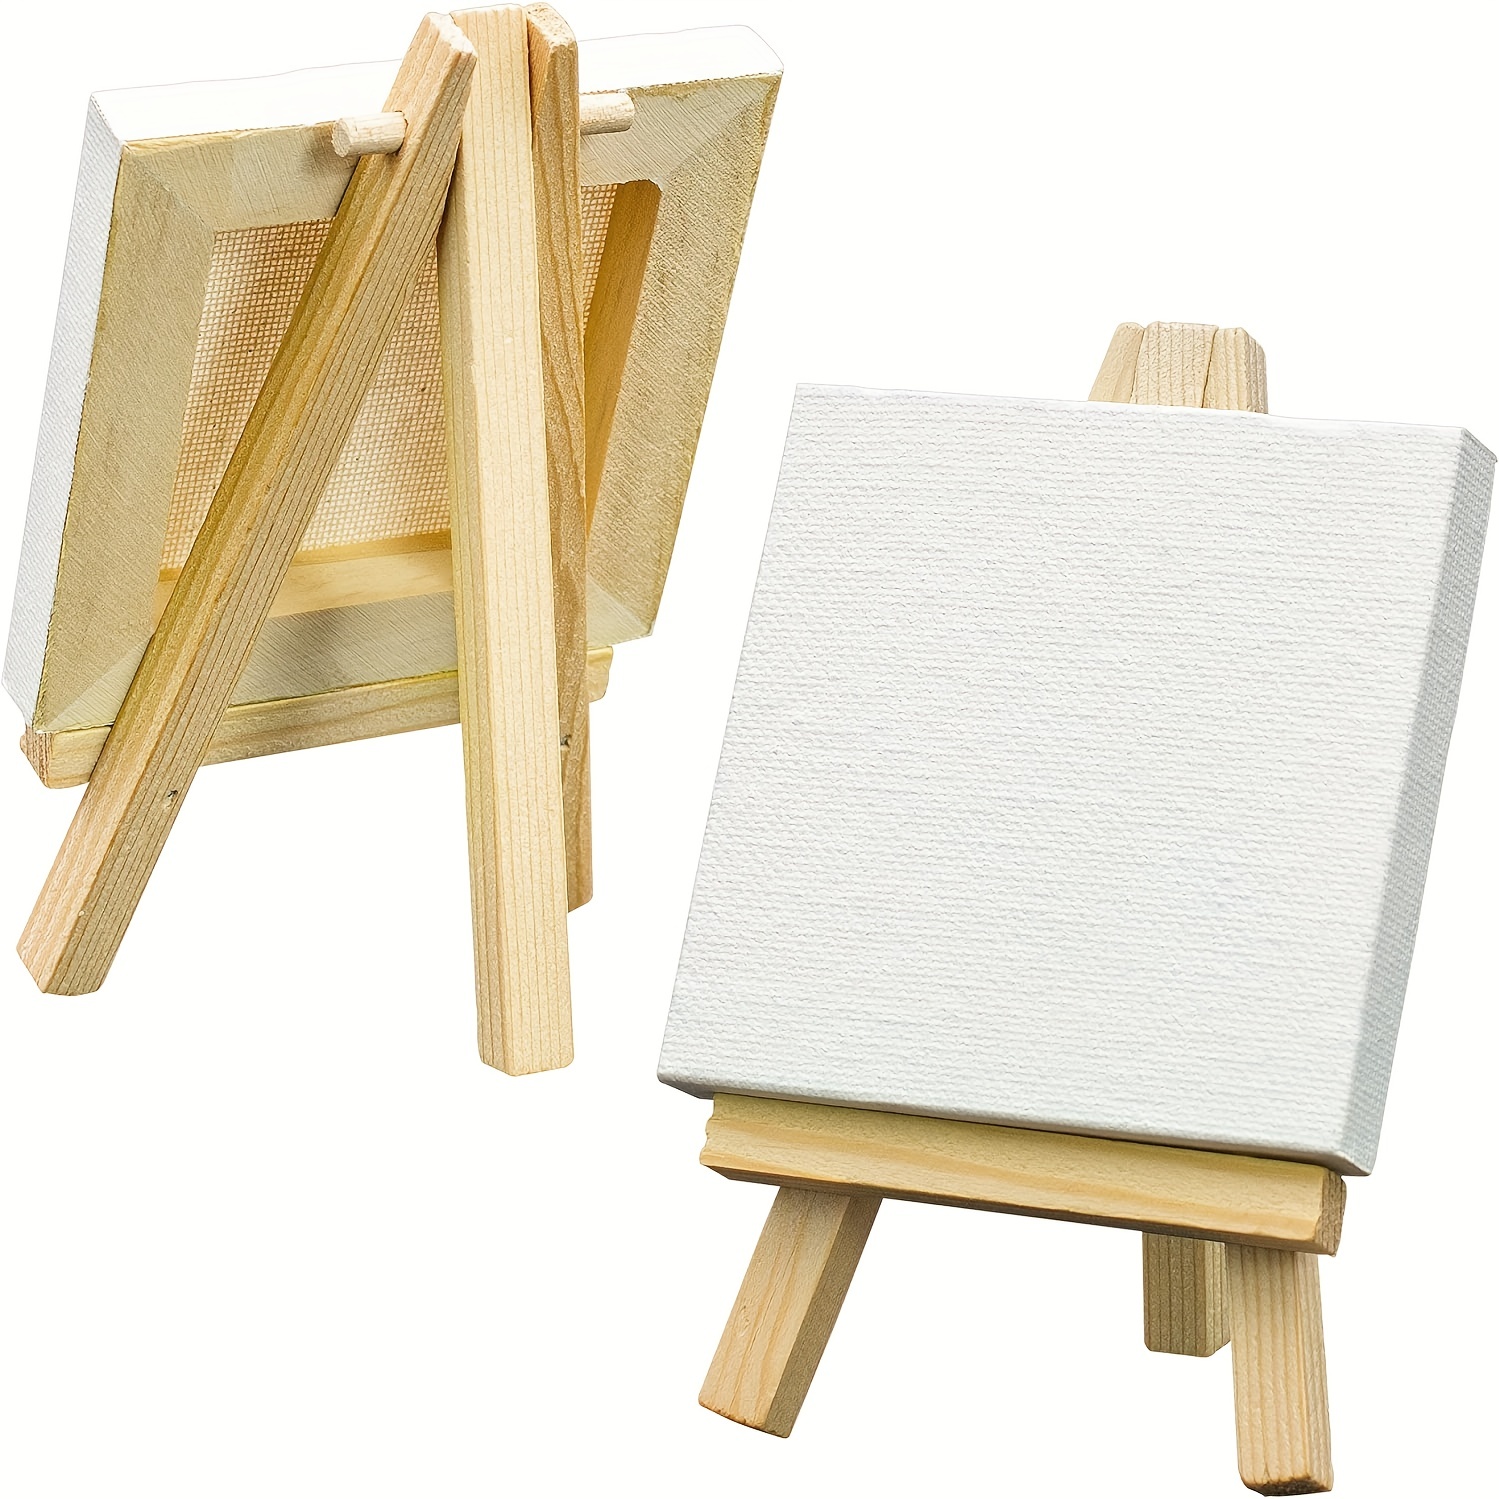  COHEALI 10 Sets Mini Frame Mini Painting Boards Canvas with  Easel Stretched Canvases Canvases Paint Easel for Canvas Painting Mini  Paint Canvas Large Easel Travel Cloth Sketchbook Blank : Office Products